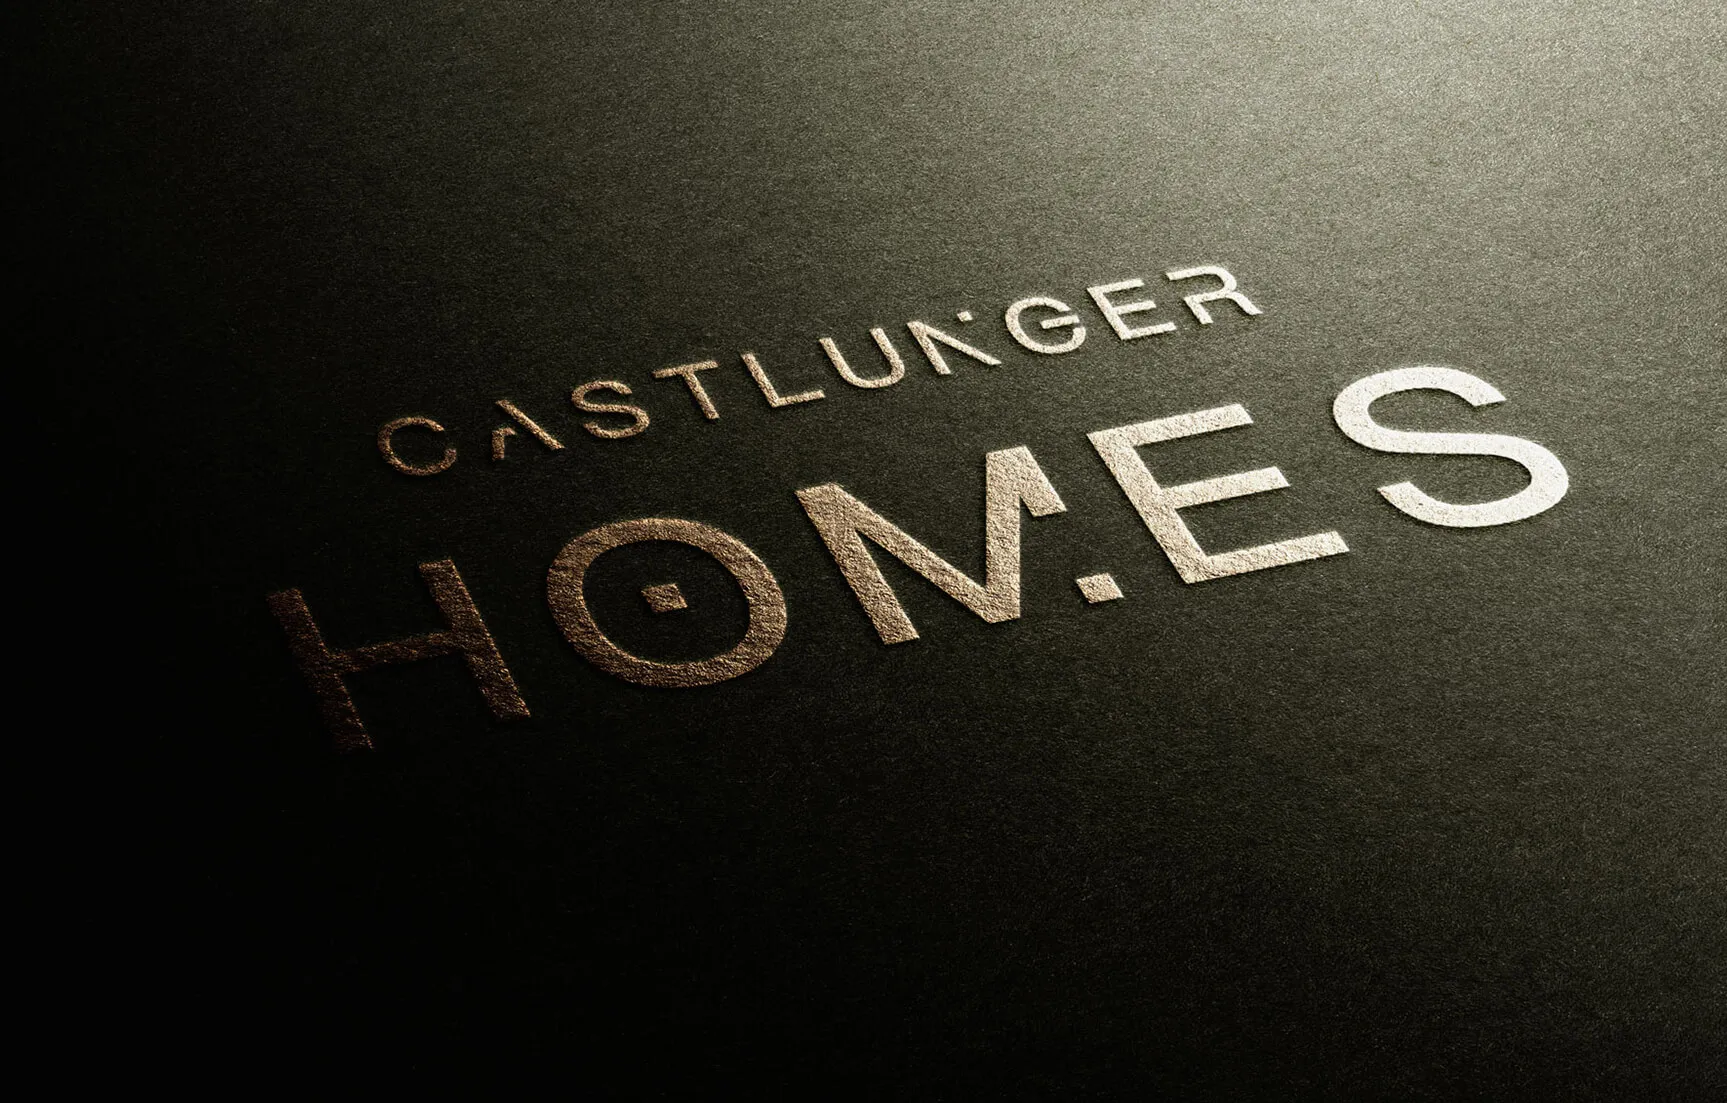 Castlunger Homes – Homes for Generations